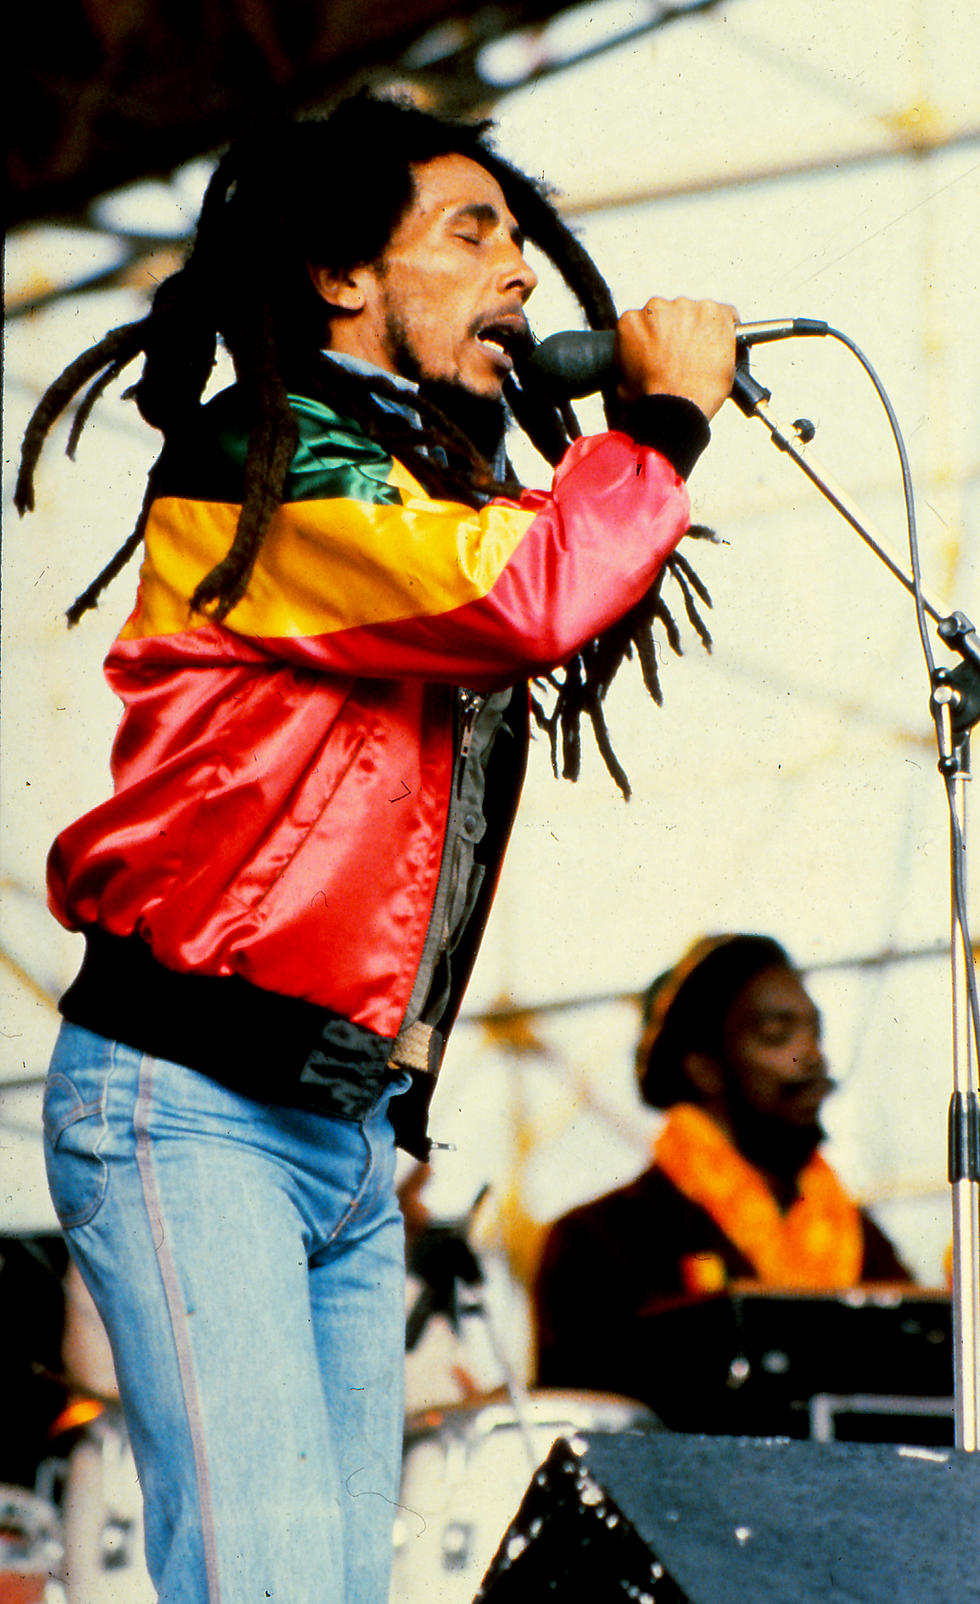 Bob Marley’s Estate Settles With Louisiana Based Chicken Chain